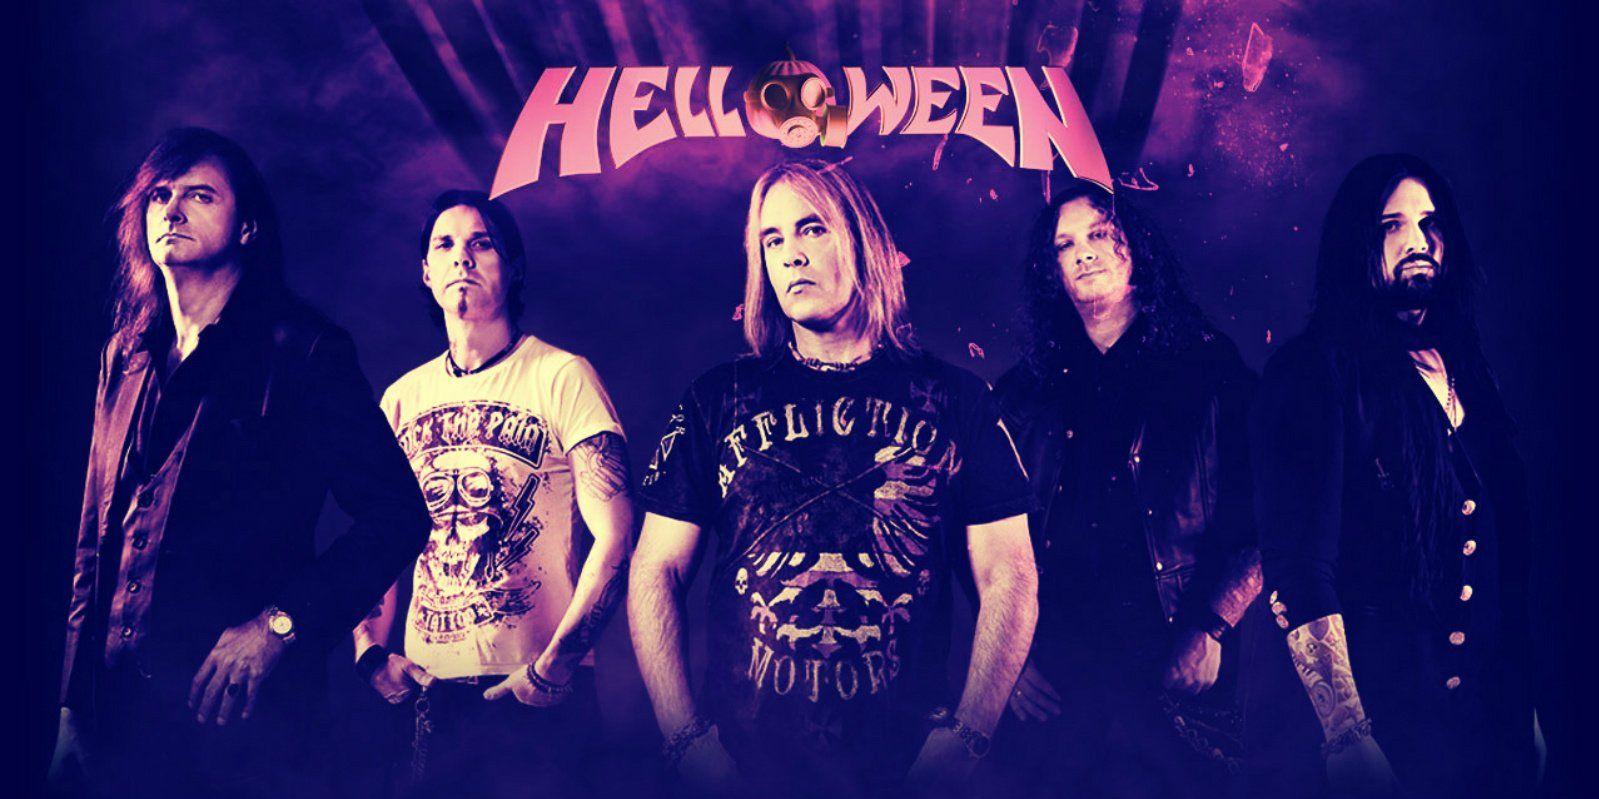 Helloween Wallpaper and Background Imagex799